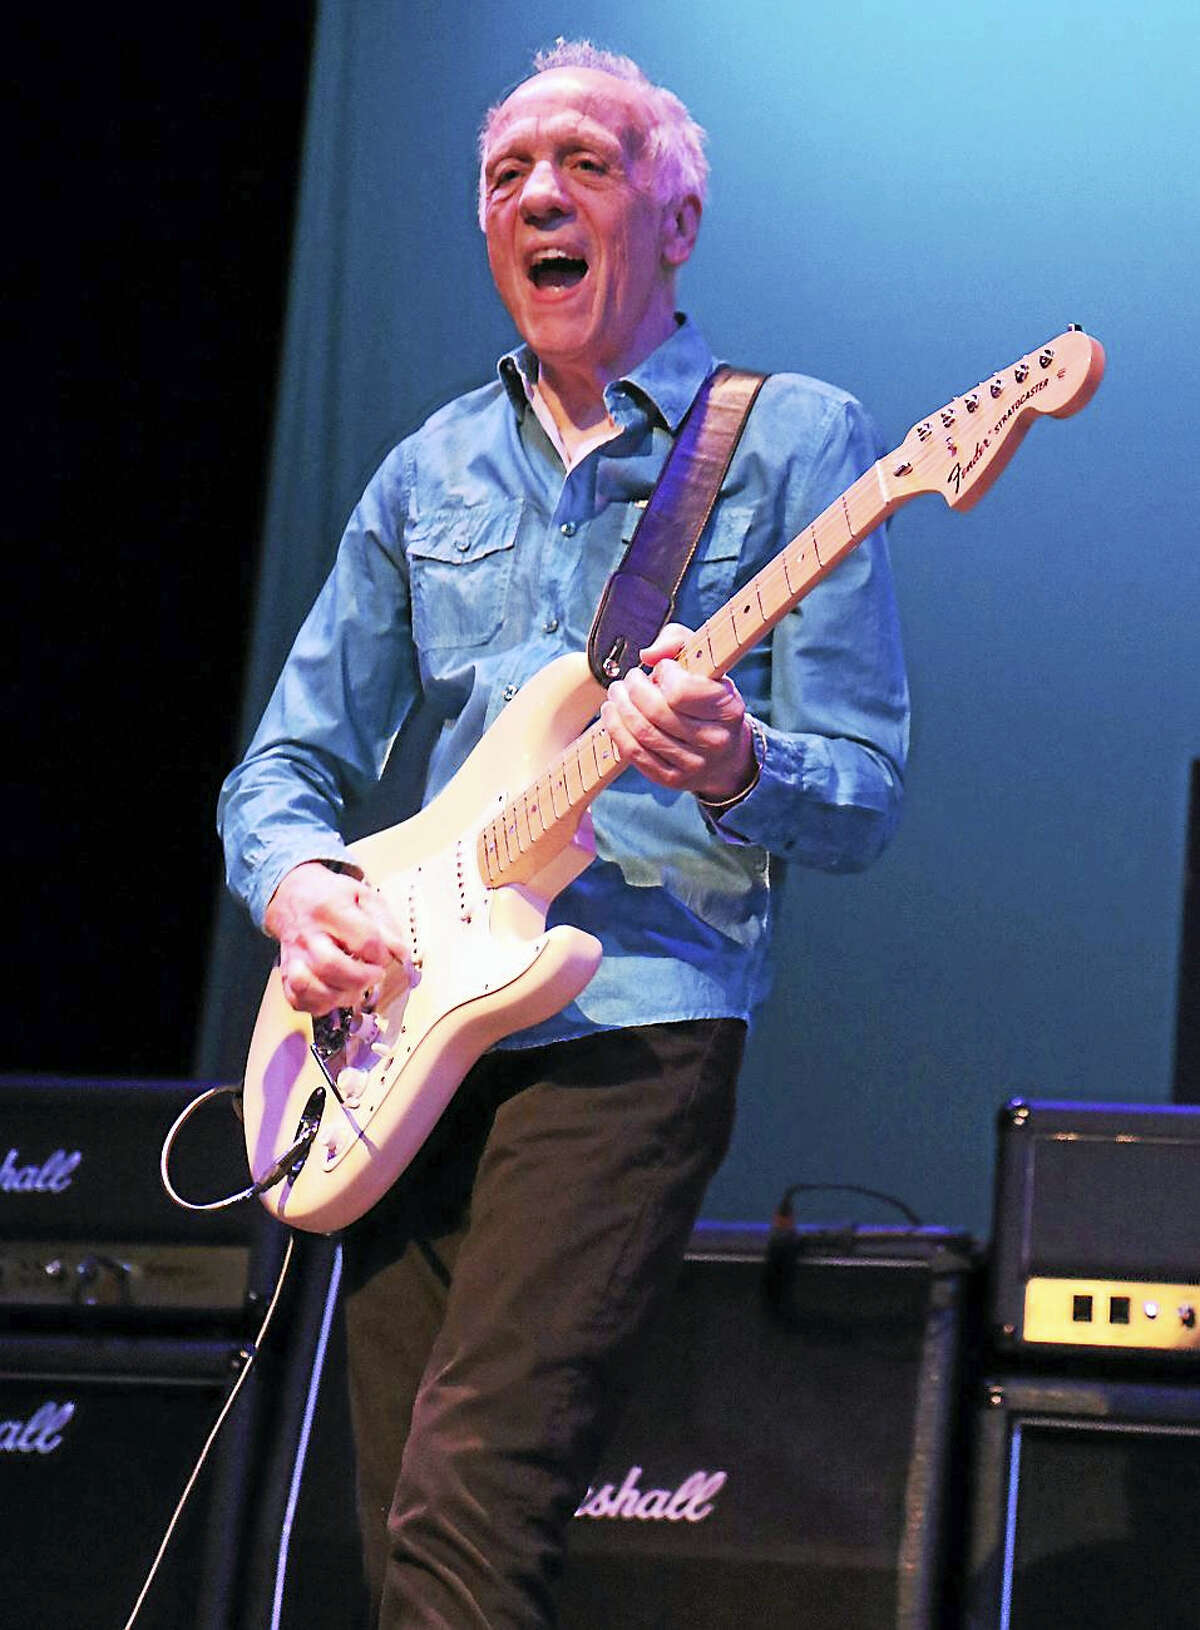 Photo by John Atashian Guitarist and singer Robin Trower, who achieved success with Procol Harum during the 1960s, is shown performing on stage during his appearance at the Ridgfield Playhouse on Saturday night April 23rd. The English rock guitar legend attracted a capacity crowd of fans and treated them to his biggest hits plus songs from his new brand new album “Where You Are Going To”.